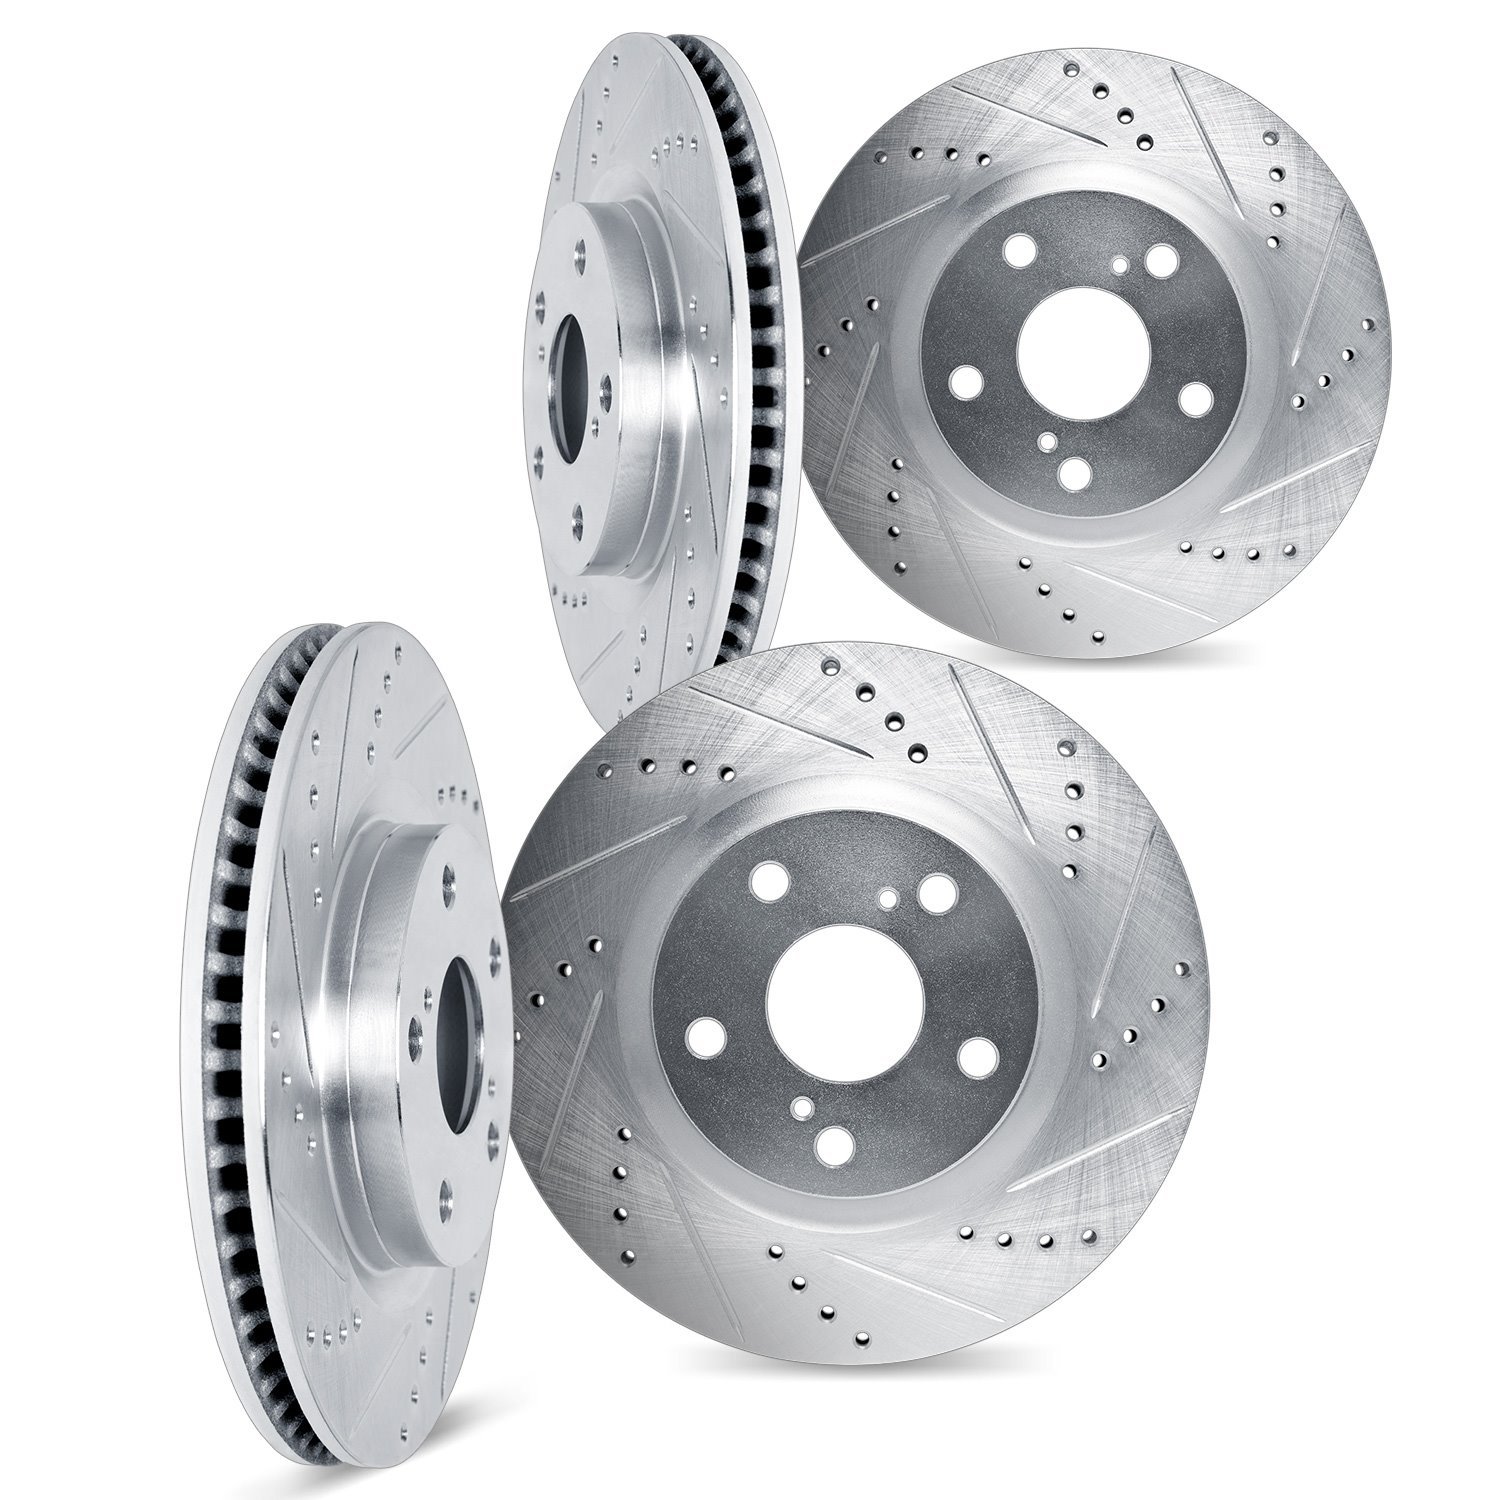 7004-68007 Drilled/Slotted Brake Rotors [Silver], 1997-2001 Infiniti/Nissan, Position: Front and Rear